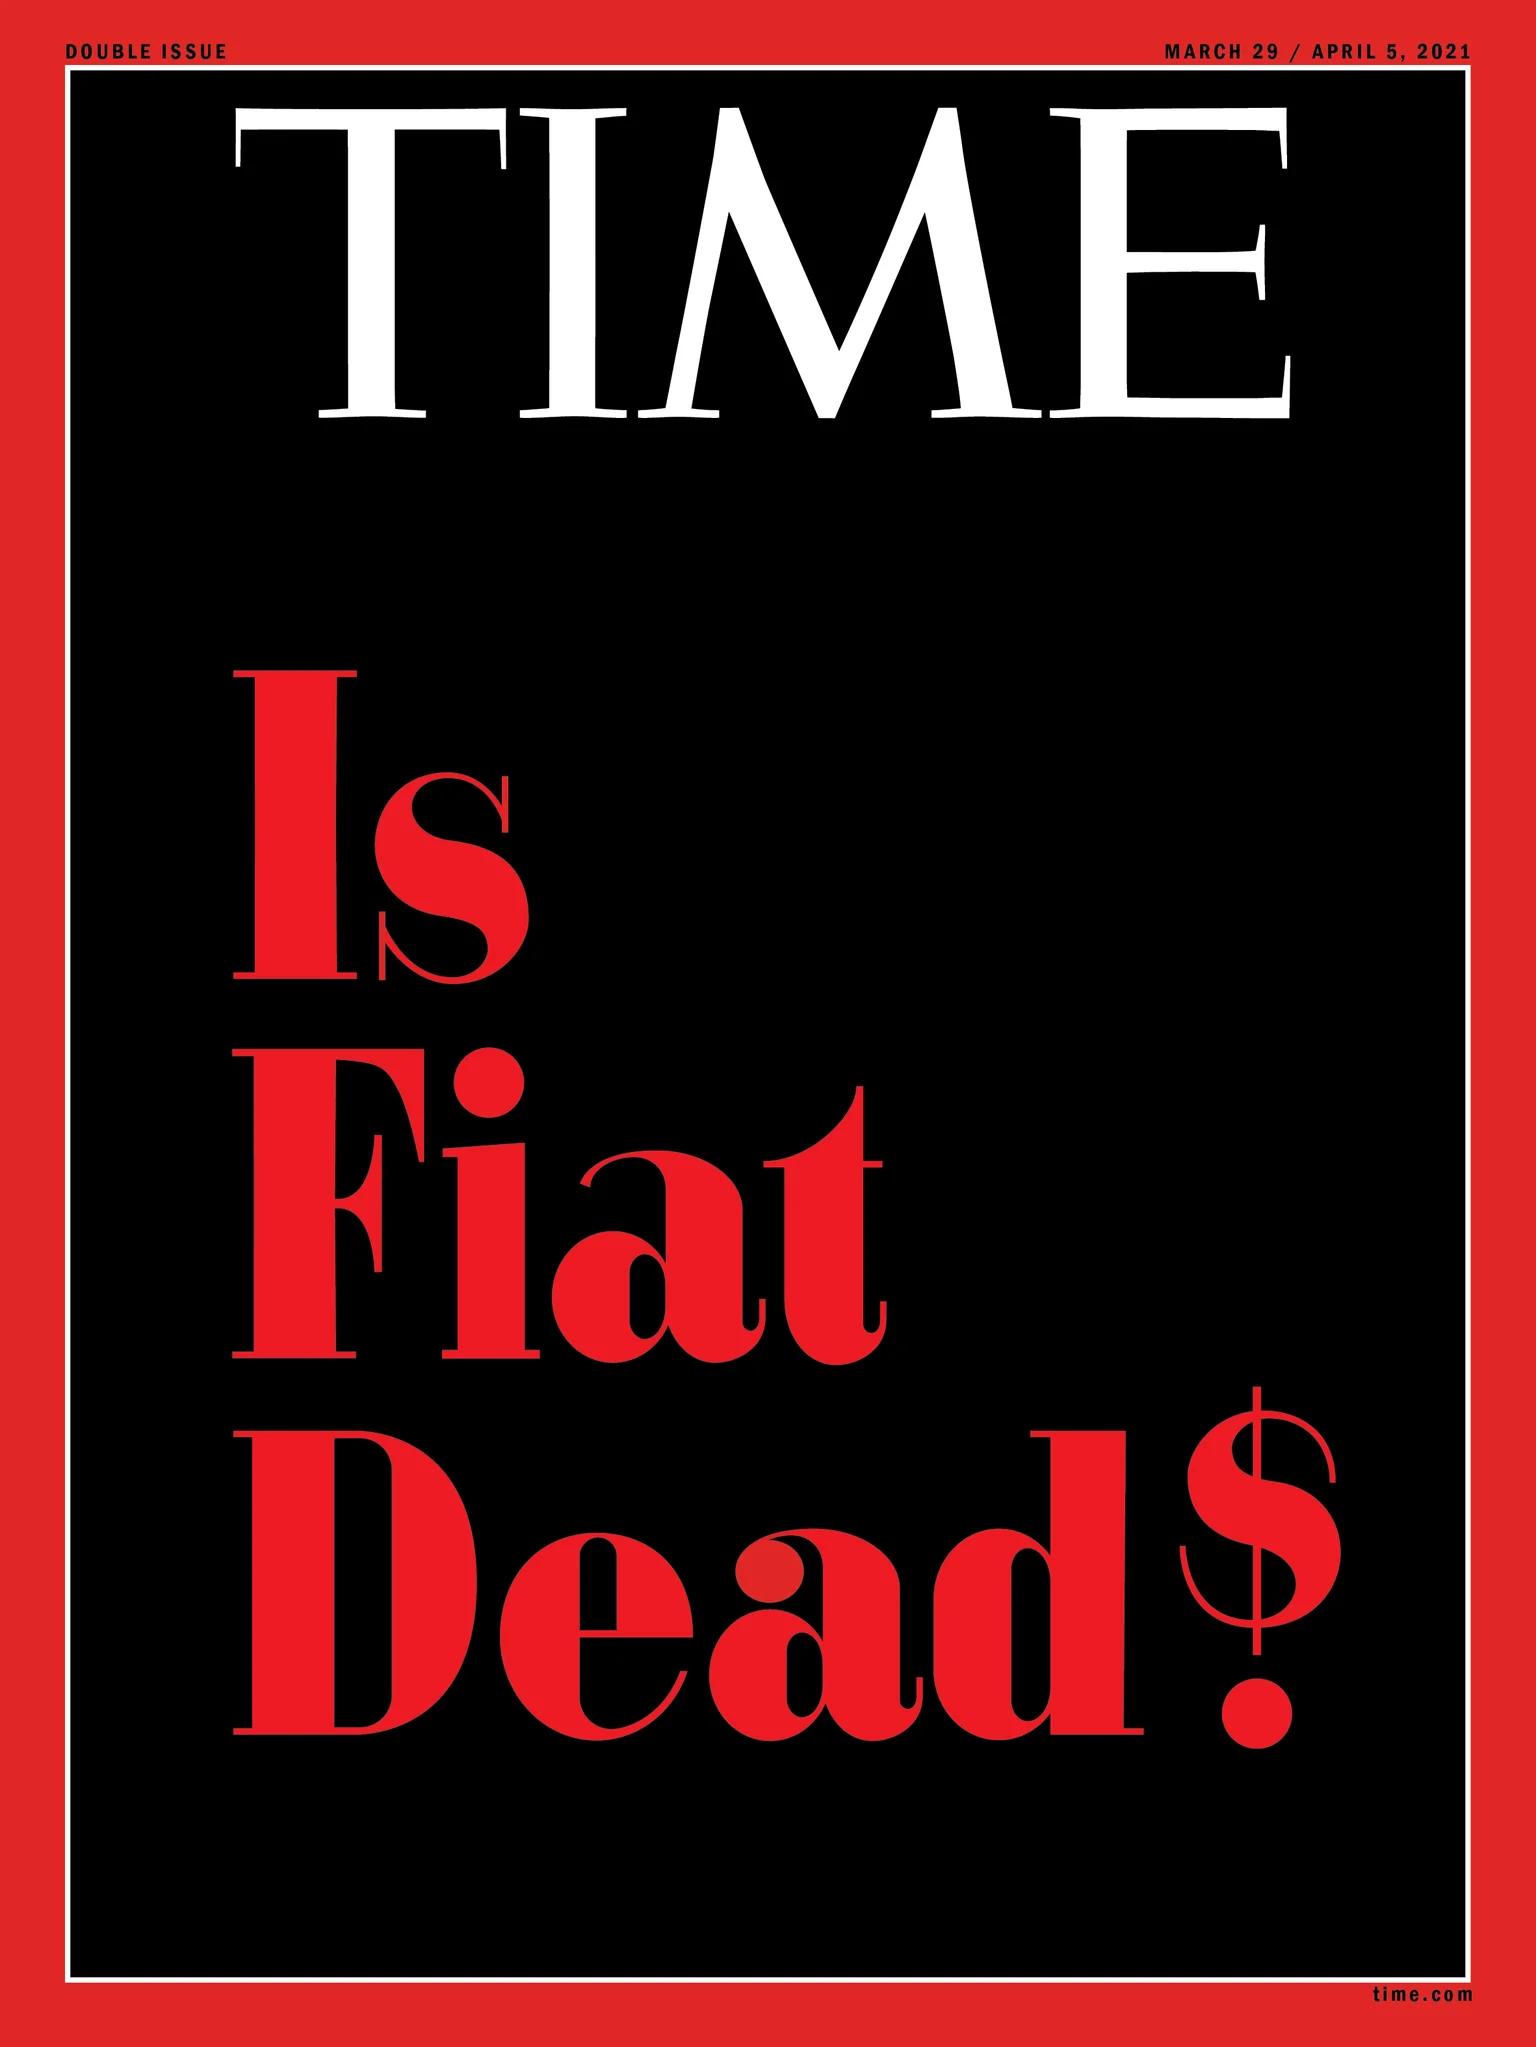 Time's upcoming magazine cover